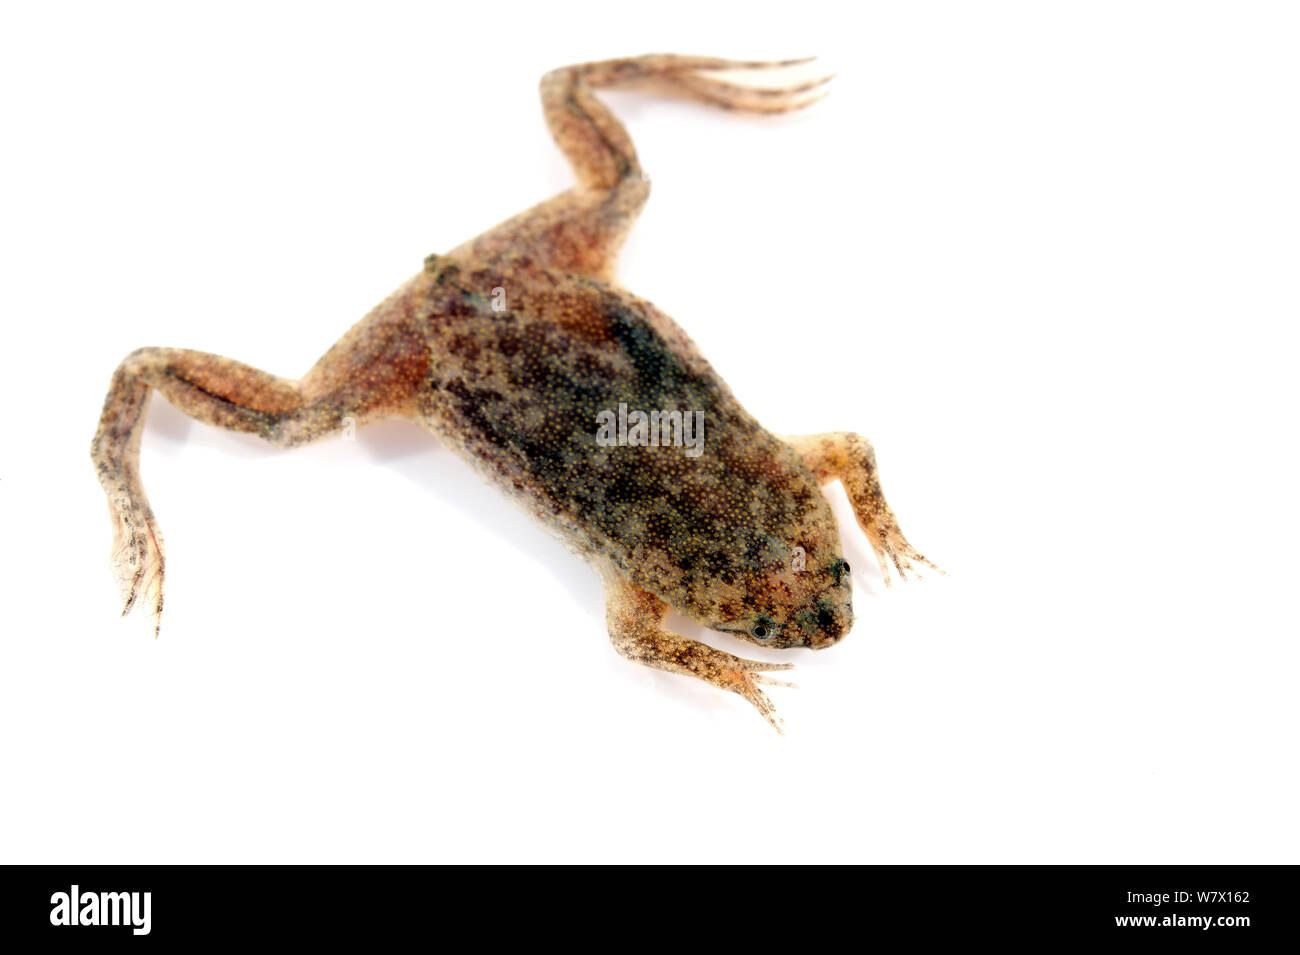 Sabana Surinam Toad (Pipa parva) against white background. Captive occurs in Colombia and Venezuela. Stock Photo